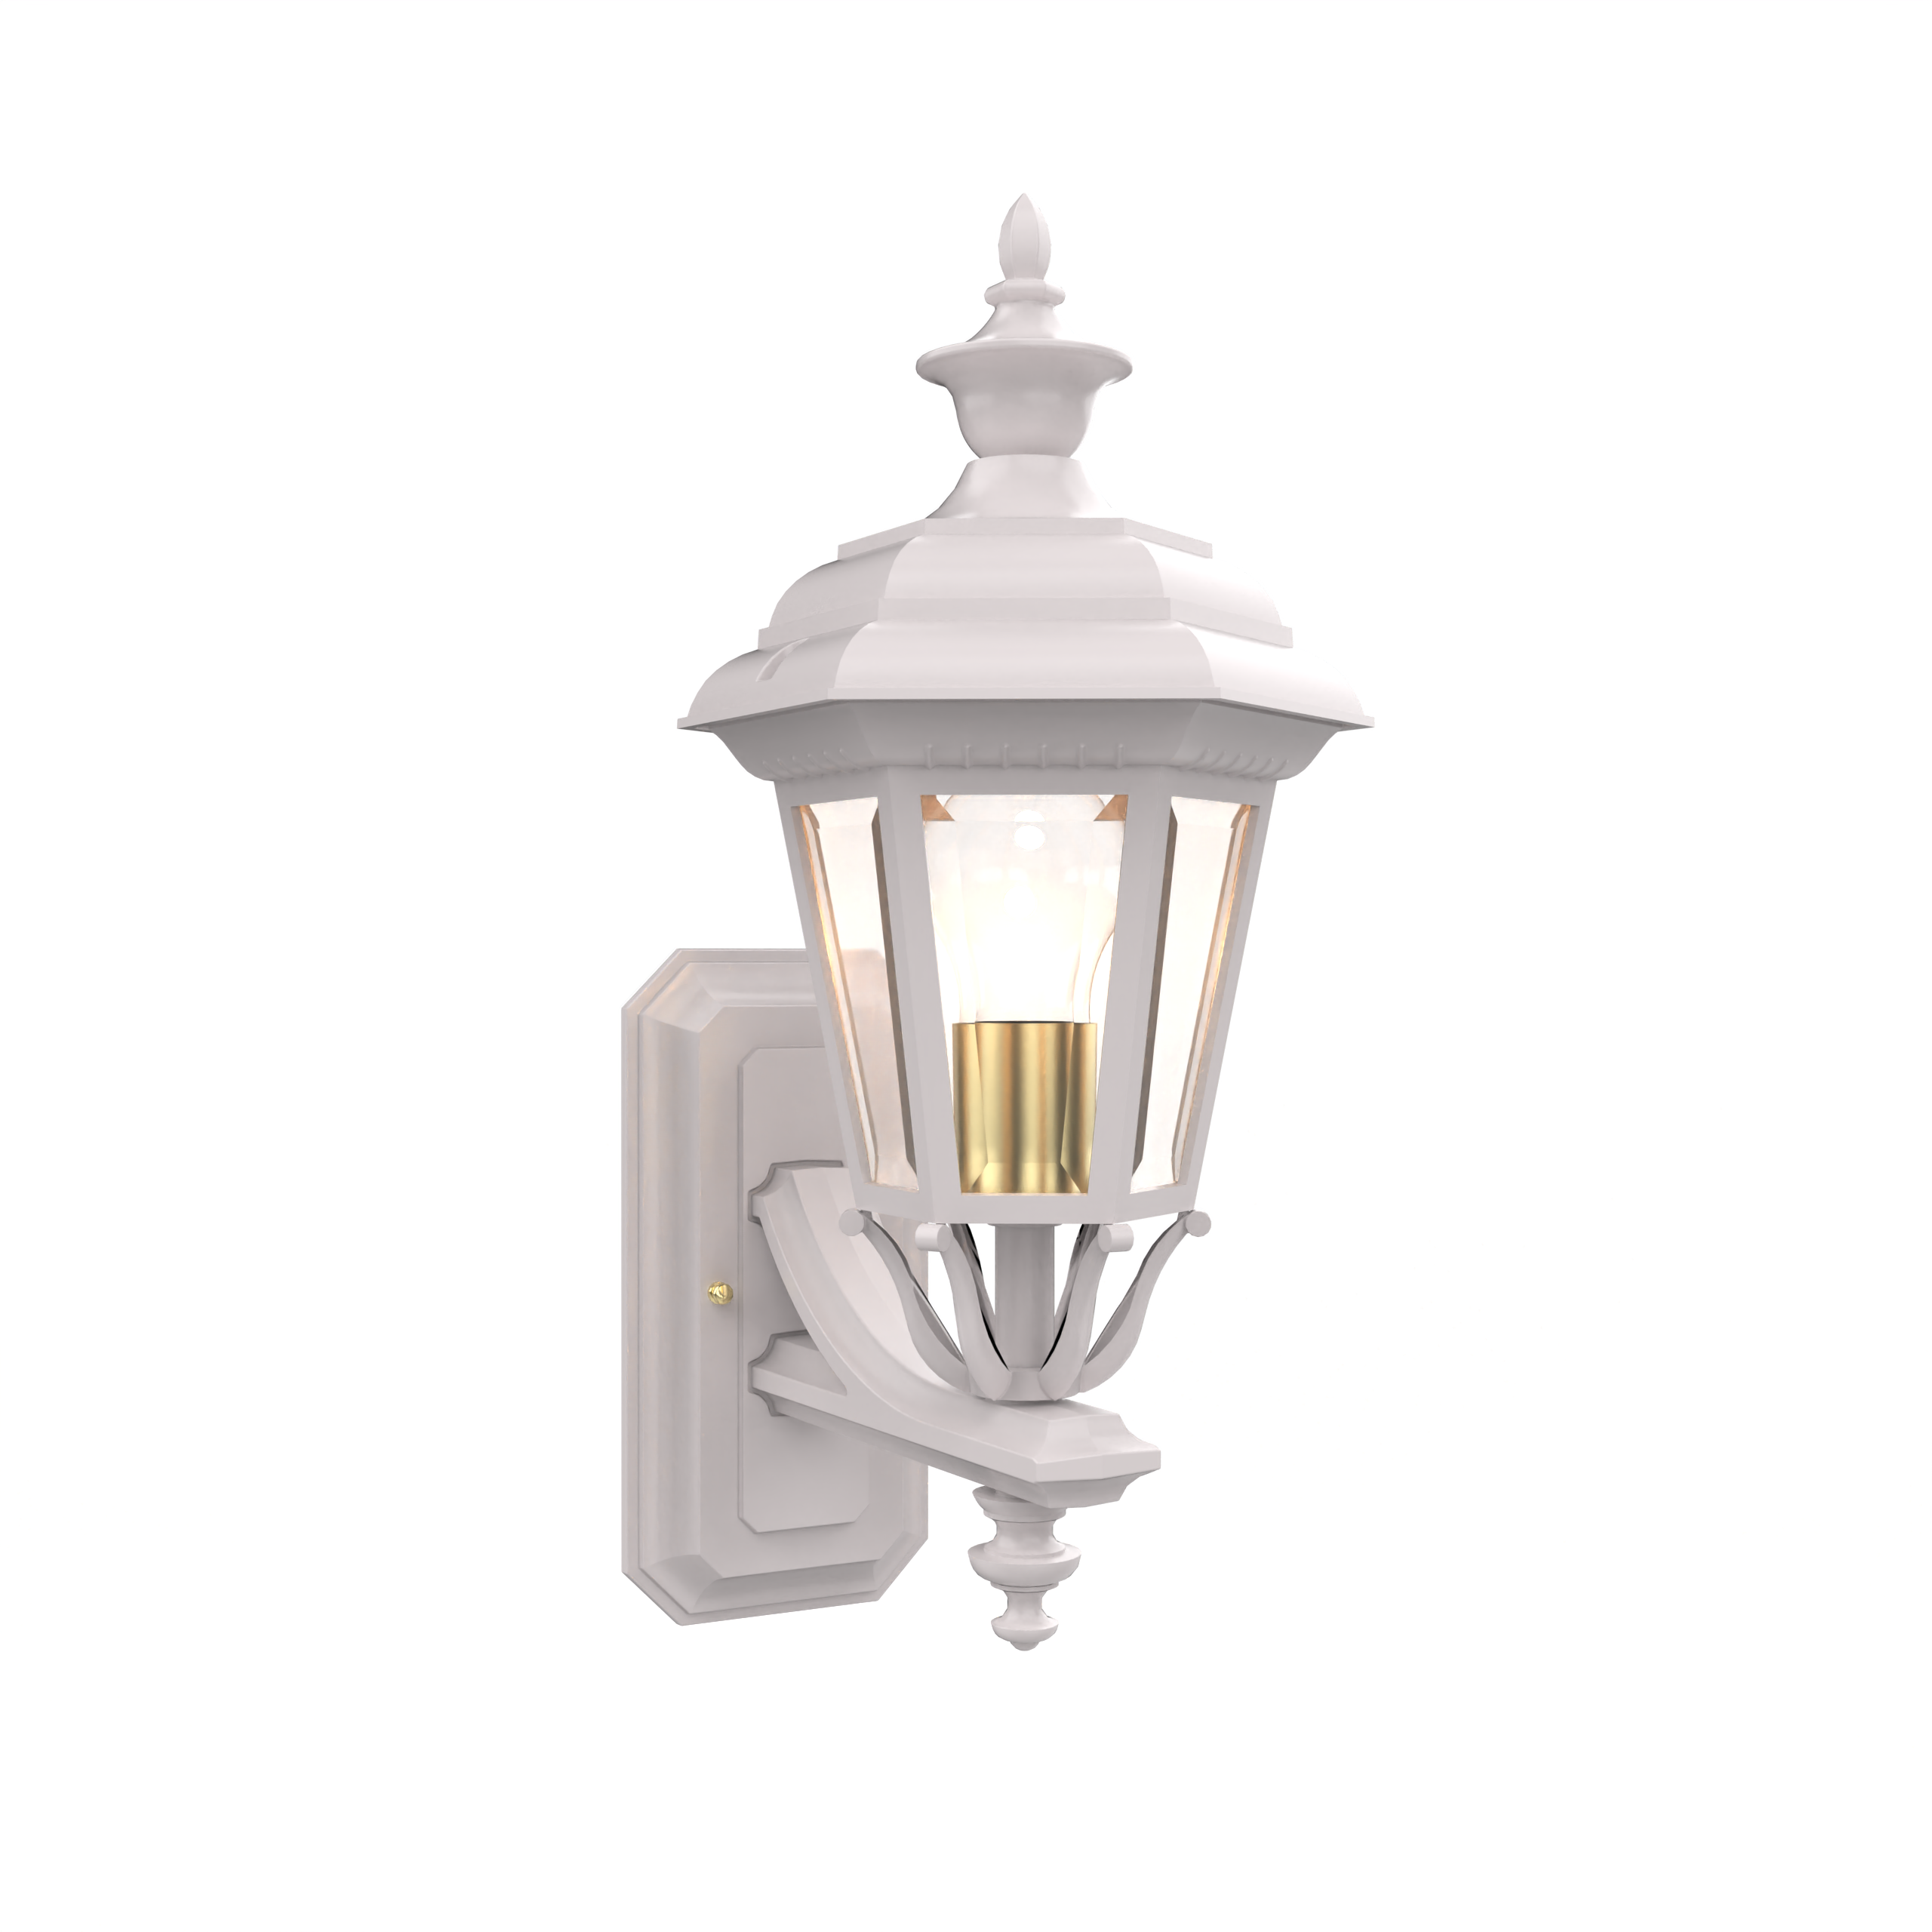 Jamestown - Uplight Wall Mount with Small Finial - 11412